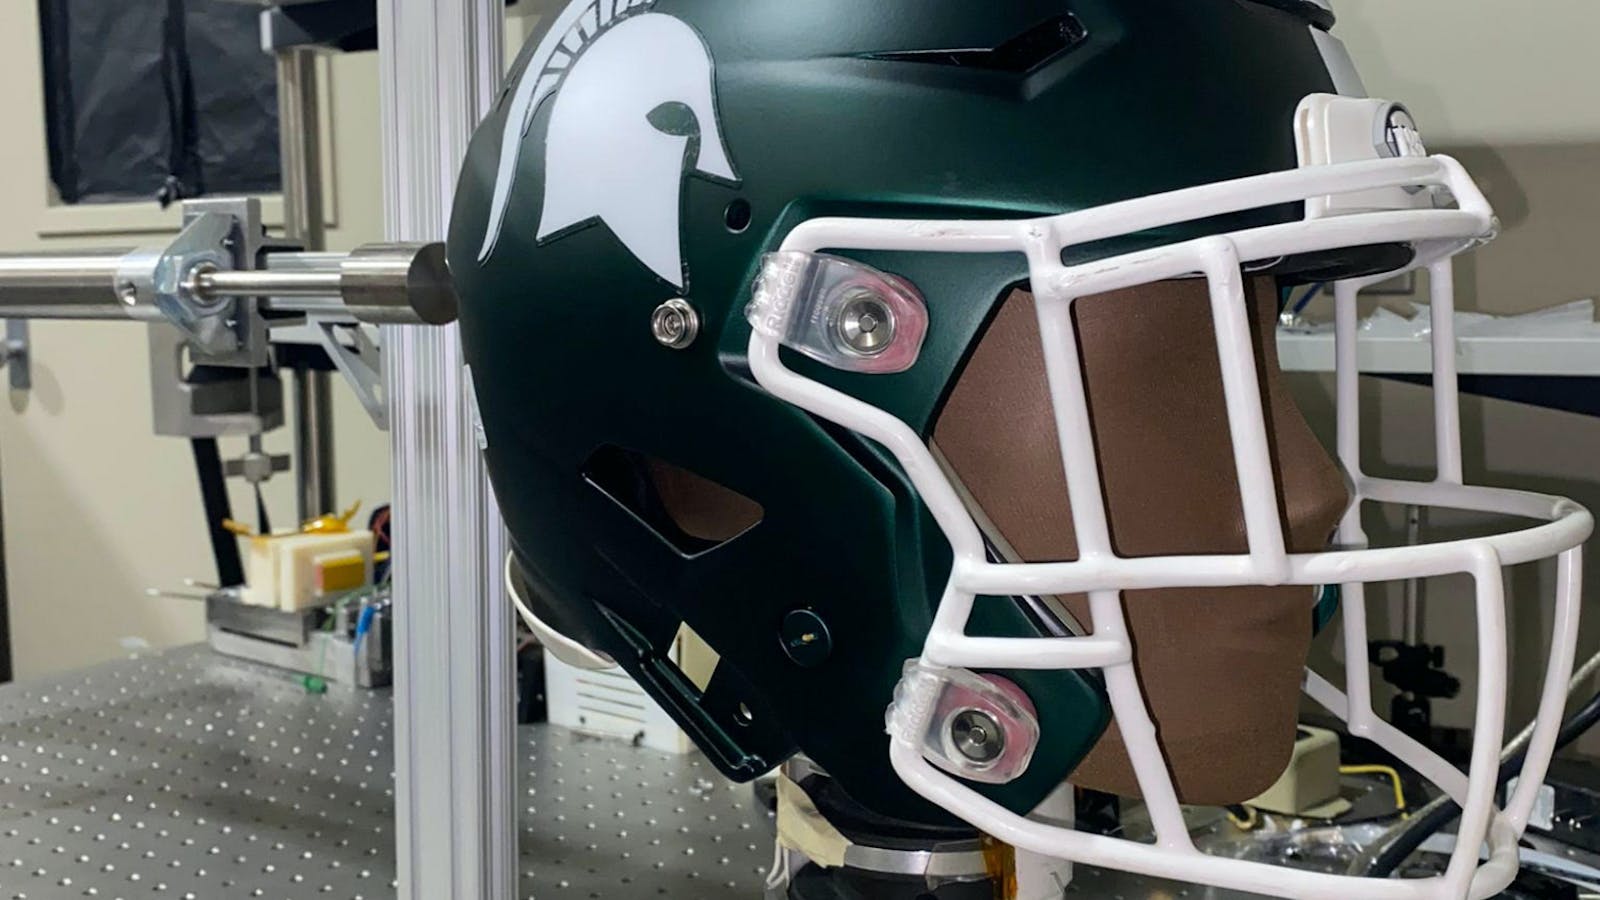 The future of sports medicine: MSU researchers develop bandages to detect concussions